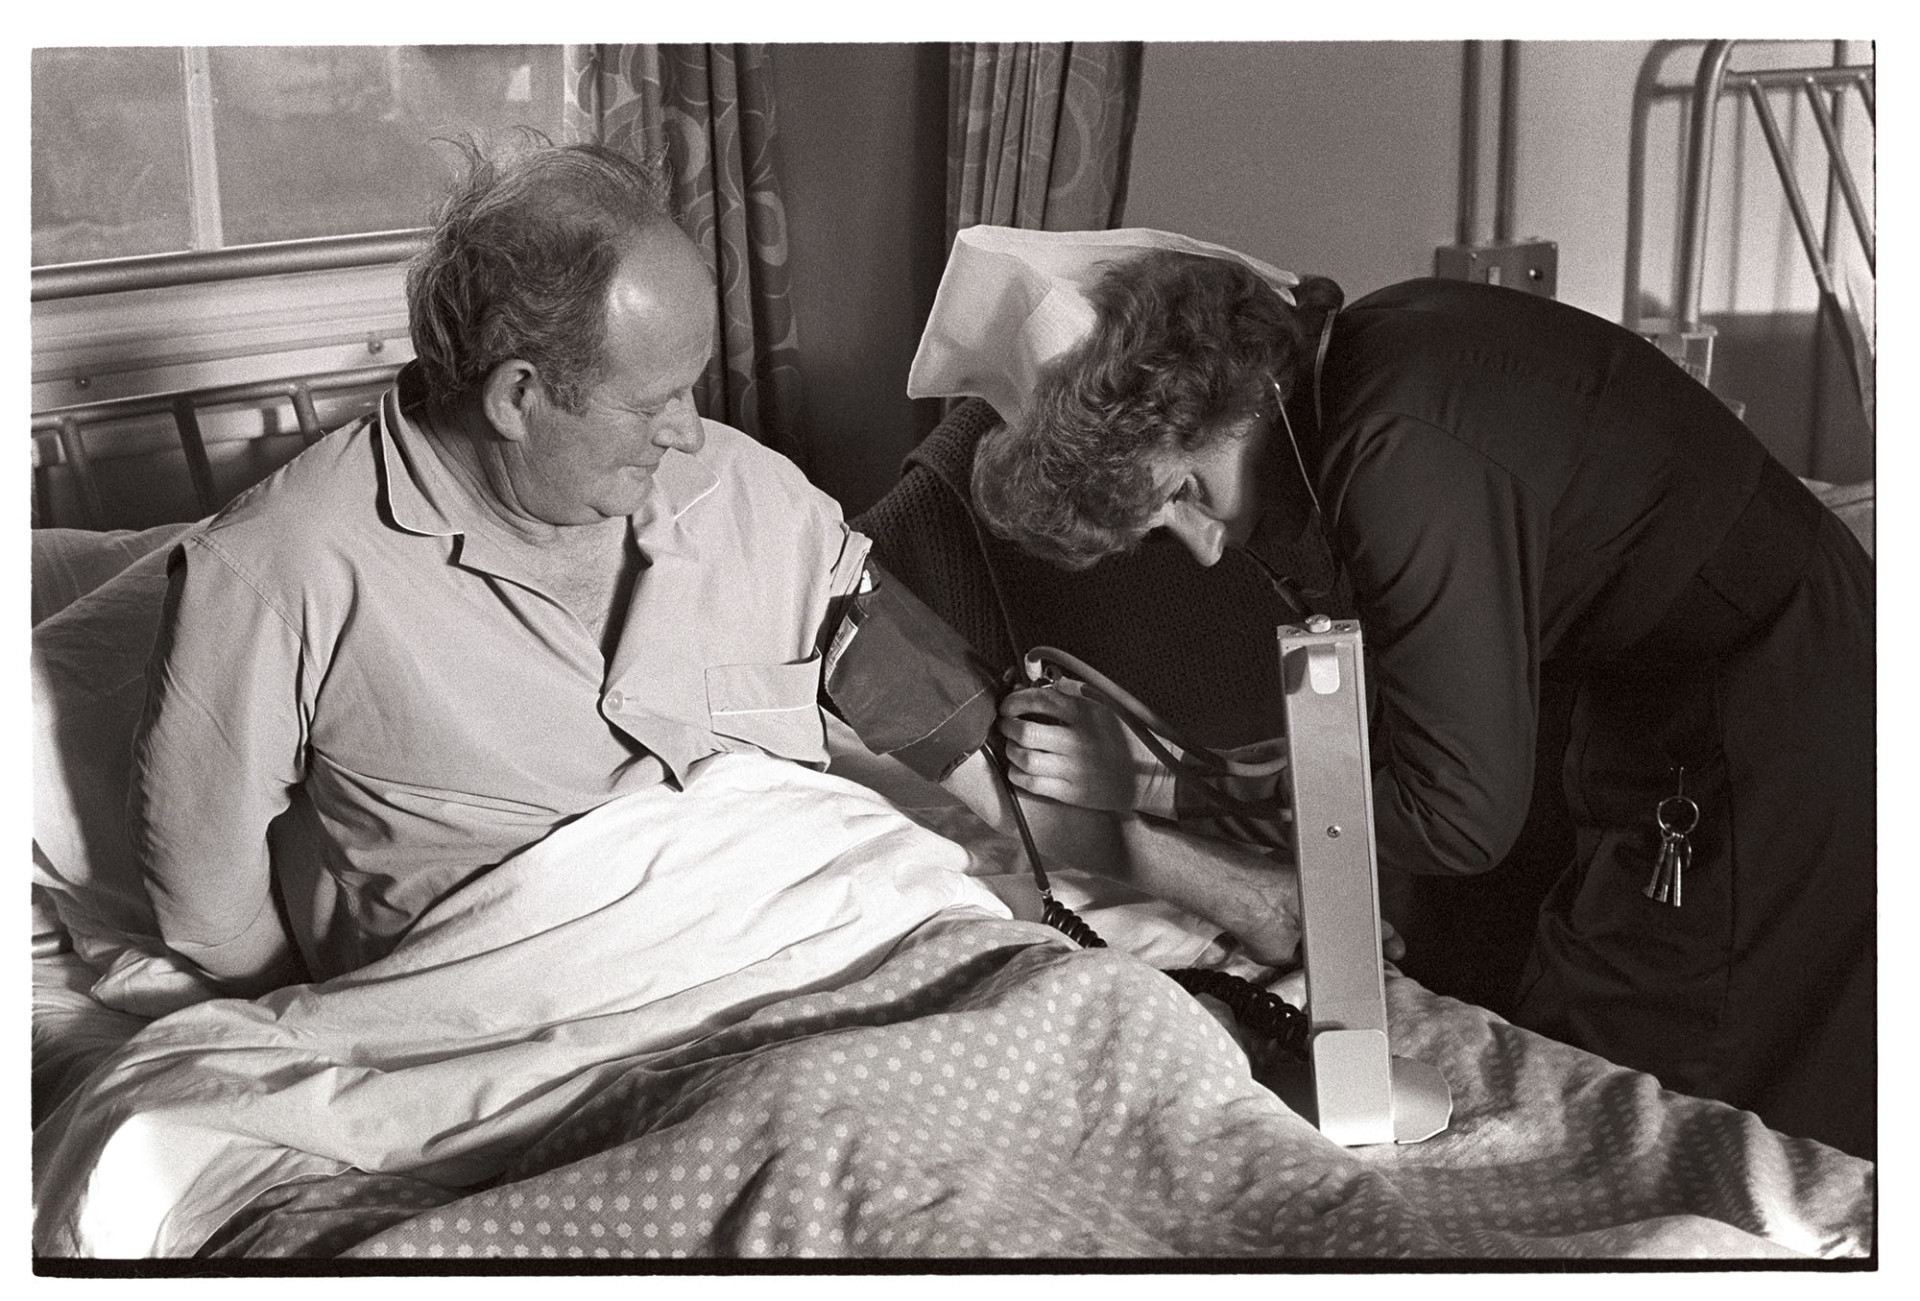 Hospital nurse taking man's blood pressure on Christmas Day.
[A nurse taking a the blood pressure of a patient in his bed at Torrington Cottage Hospital on Christmas Day.]